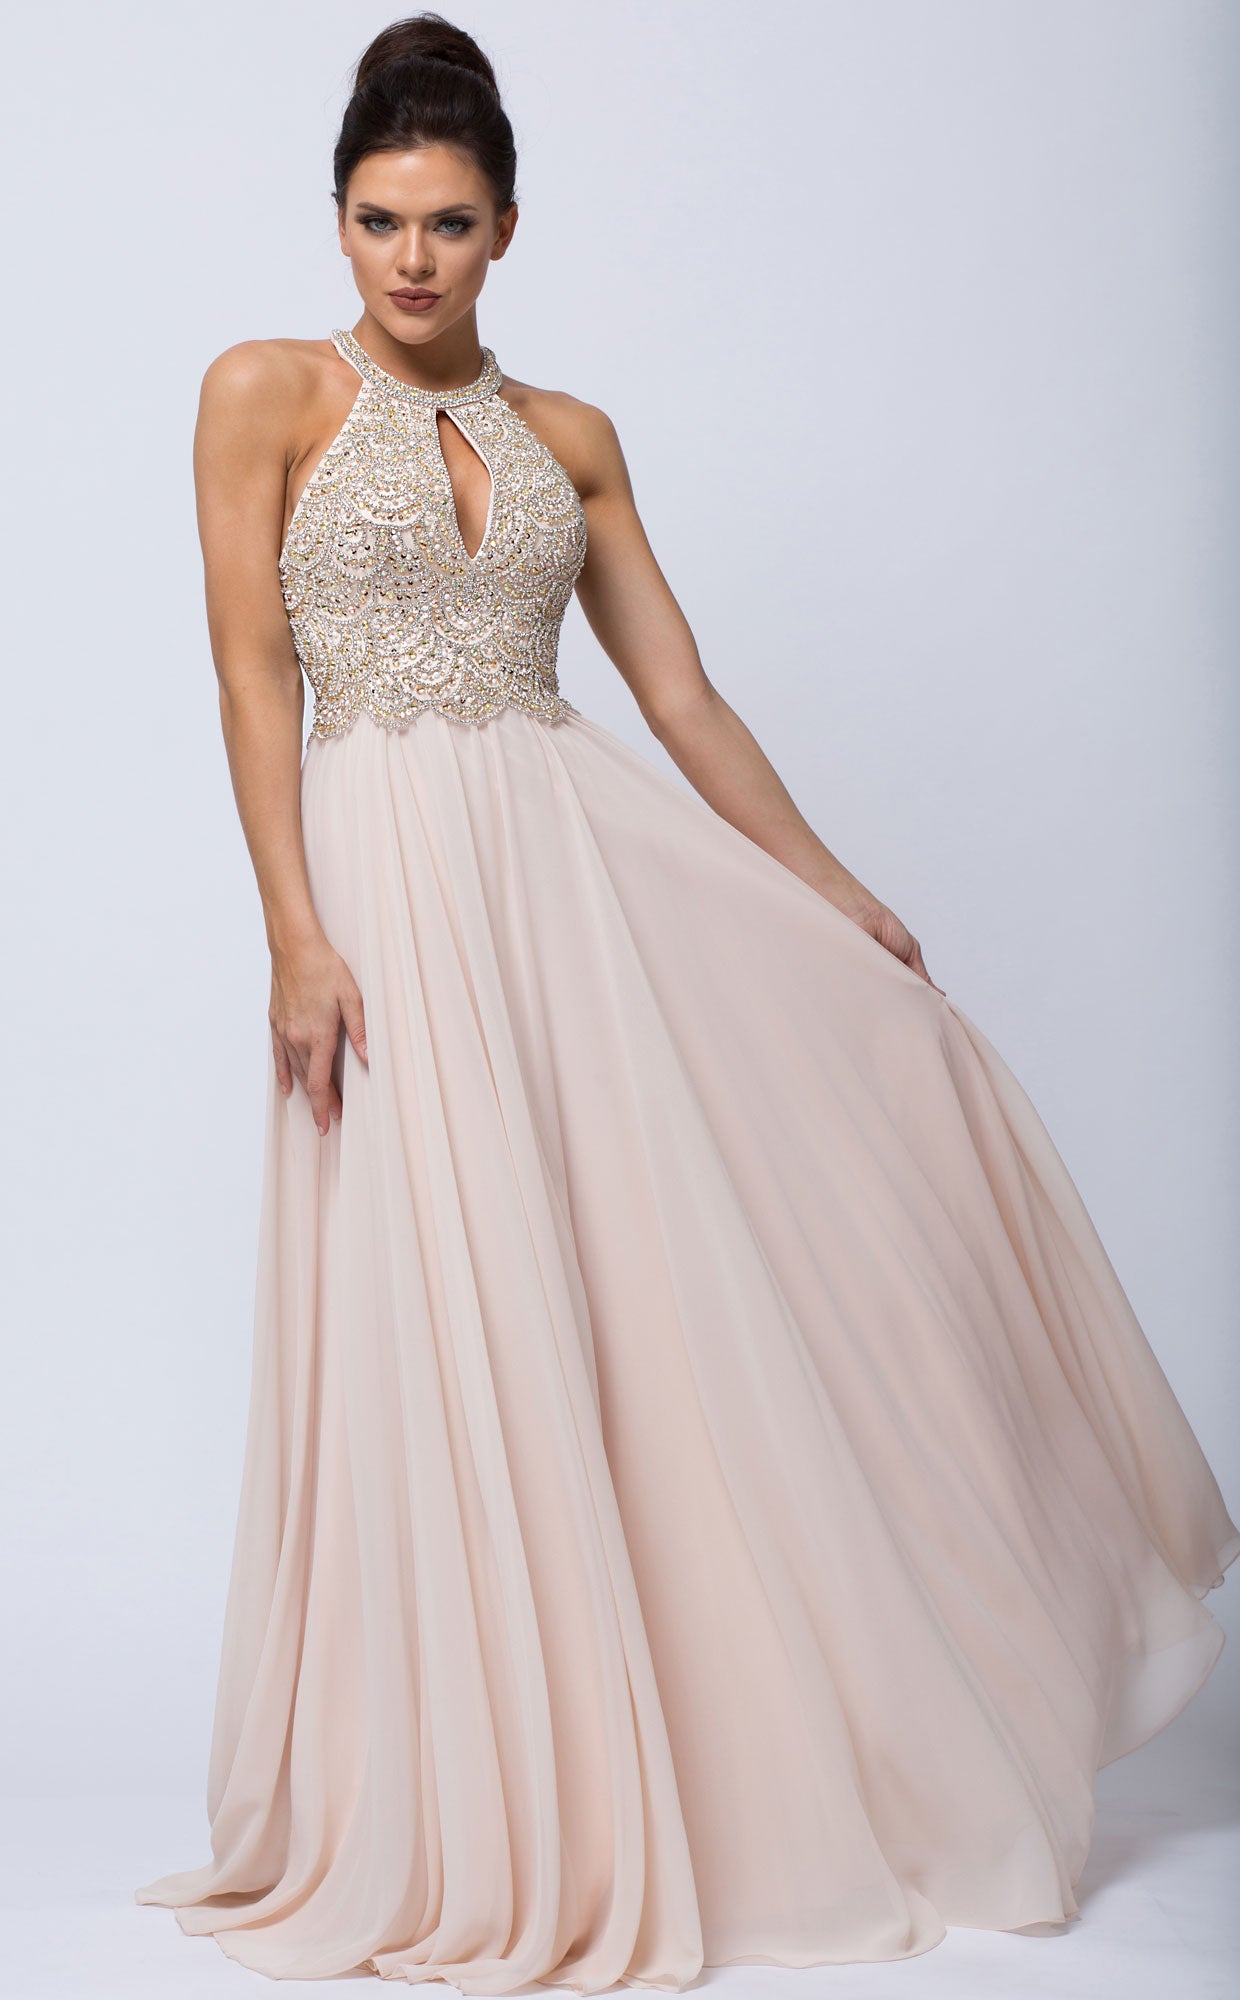 Image of Sleeveless Beaded Prom Dress With High Neckline in Champaign